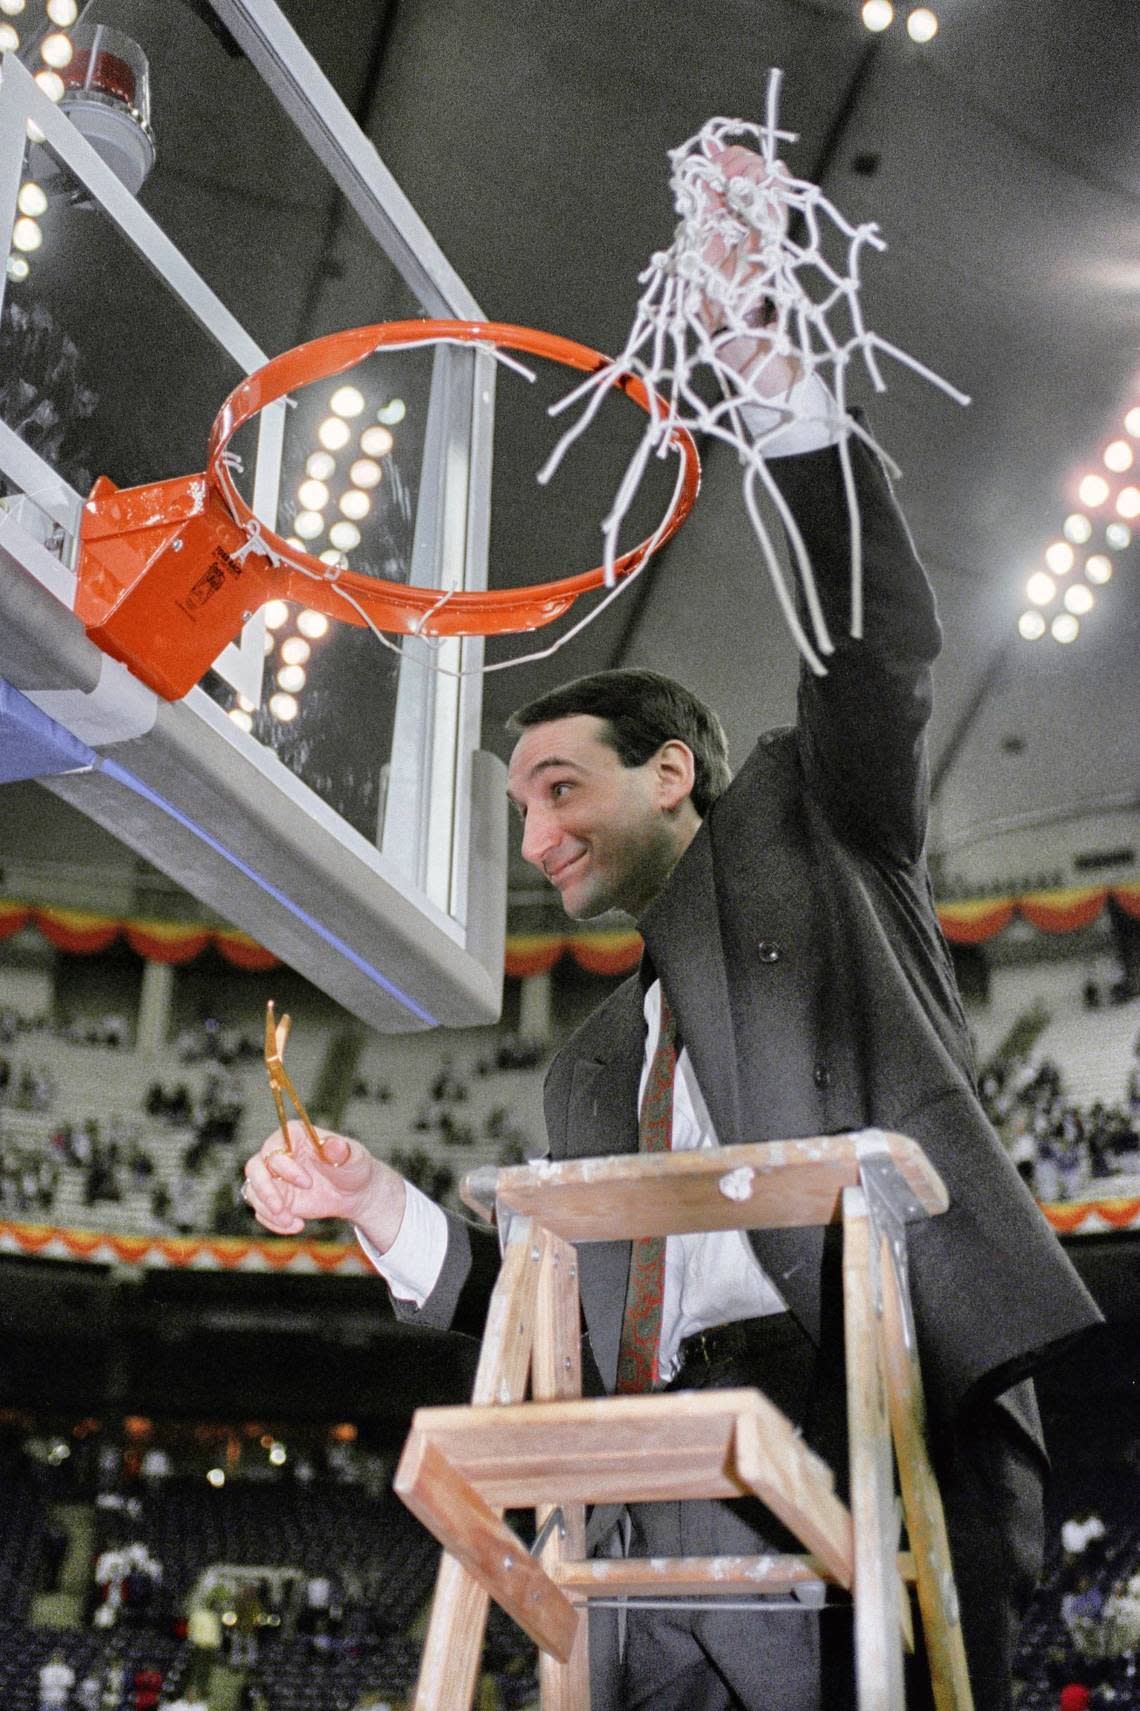 In this April 2, 1991, file photo, Duke coach Mike Krzyzewski finishes the traditional net cutting in the Indianapolis Hoosier Dome after Duke defeated Kansas 72-65 in the NCAA Final Four championship game. Recouping from a 30-point loss in the previous year’s NCAA championship game, Duke beat top-ranked UNLV and then Kansas to win the championship for the first time.